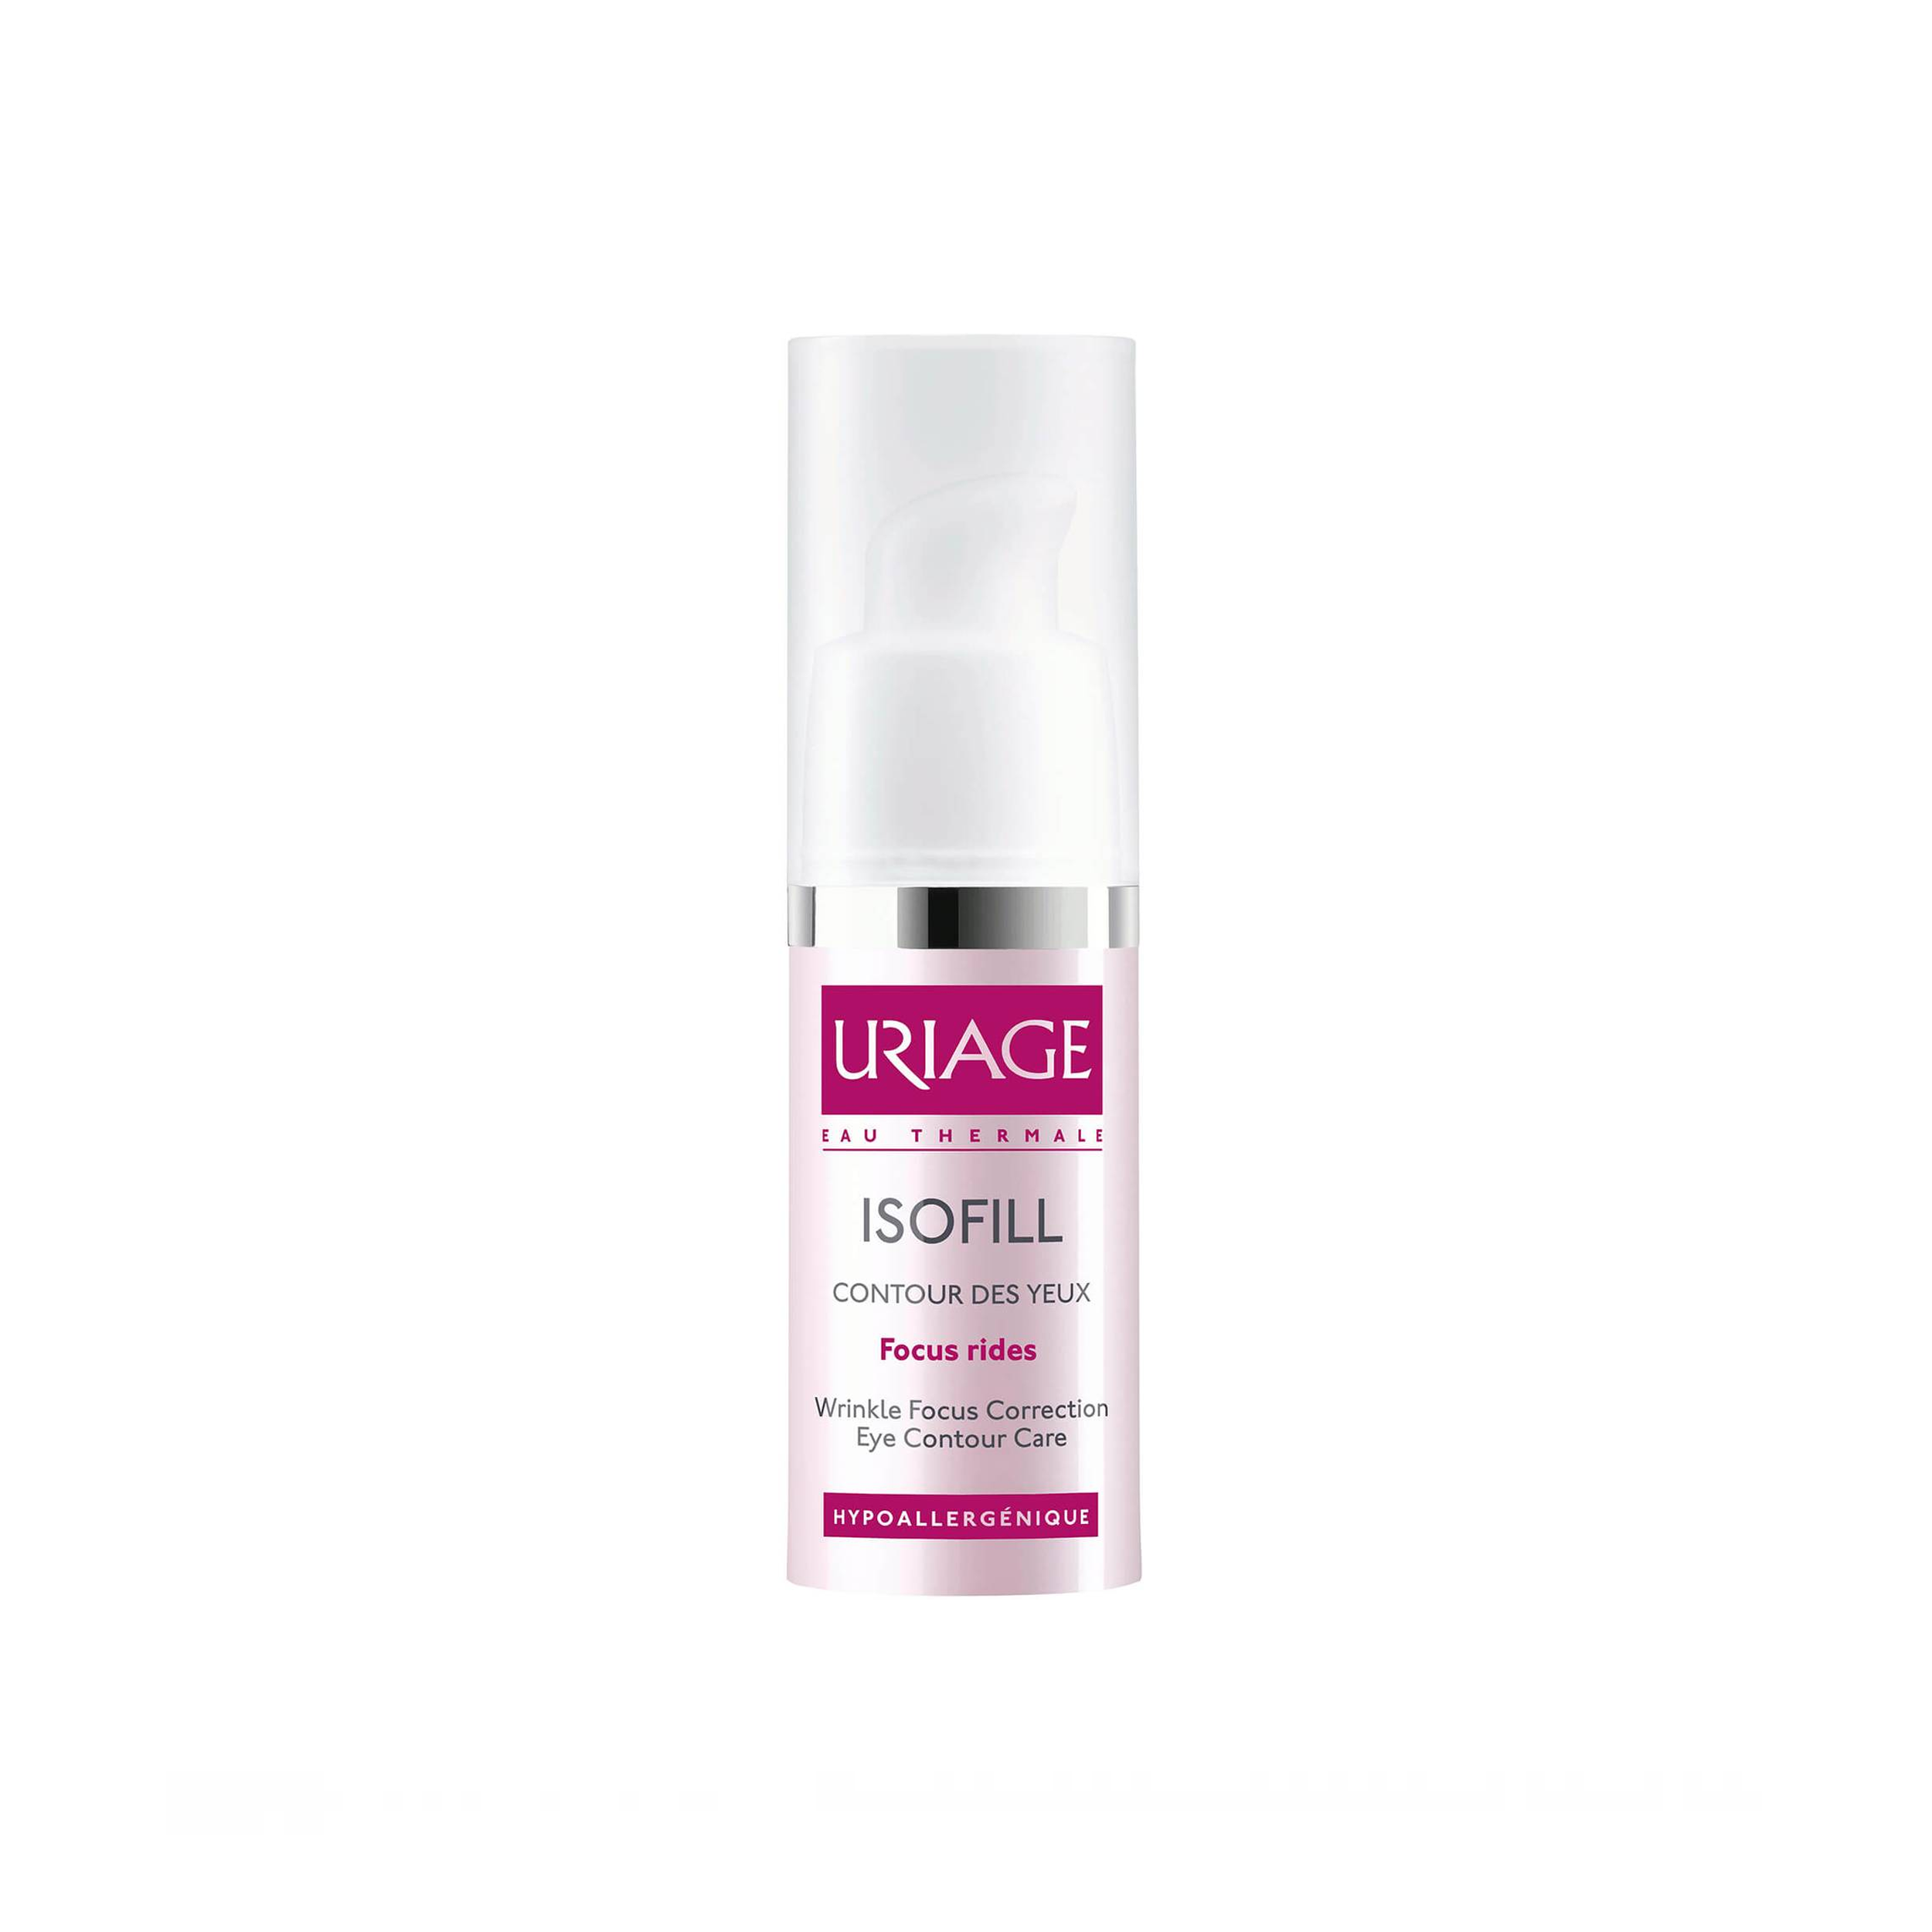 URIAGE ISOFILL CREME FOCUS RIDES YEUX 15ML